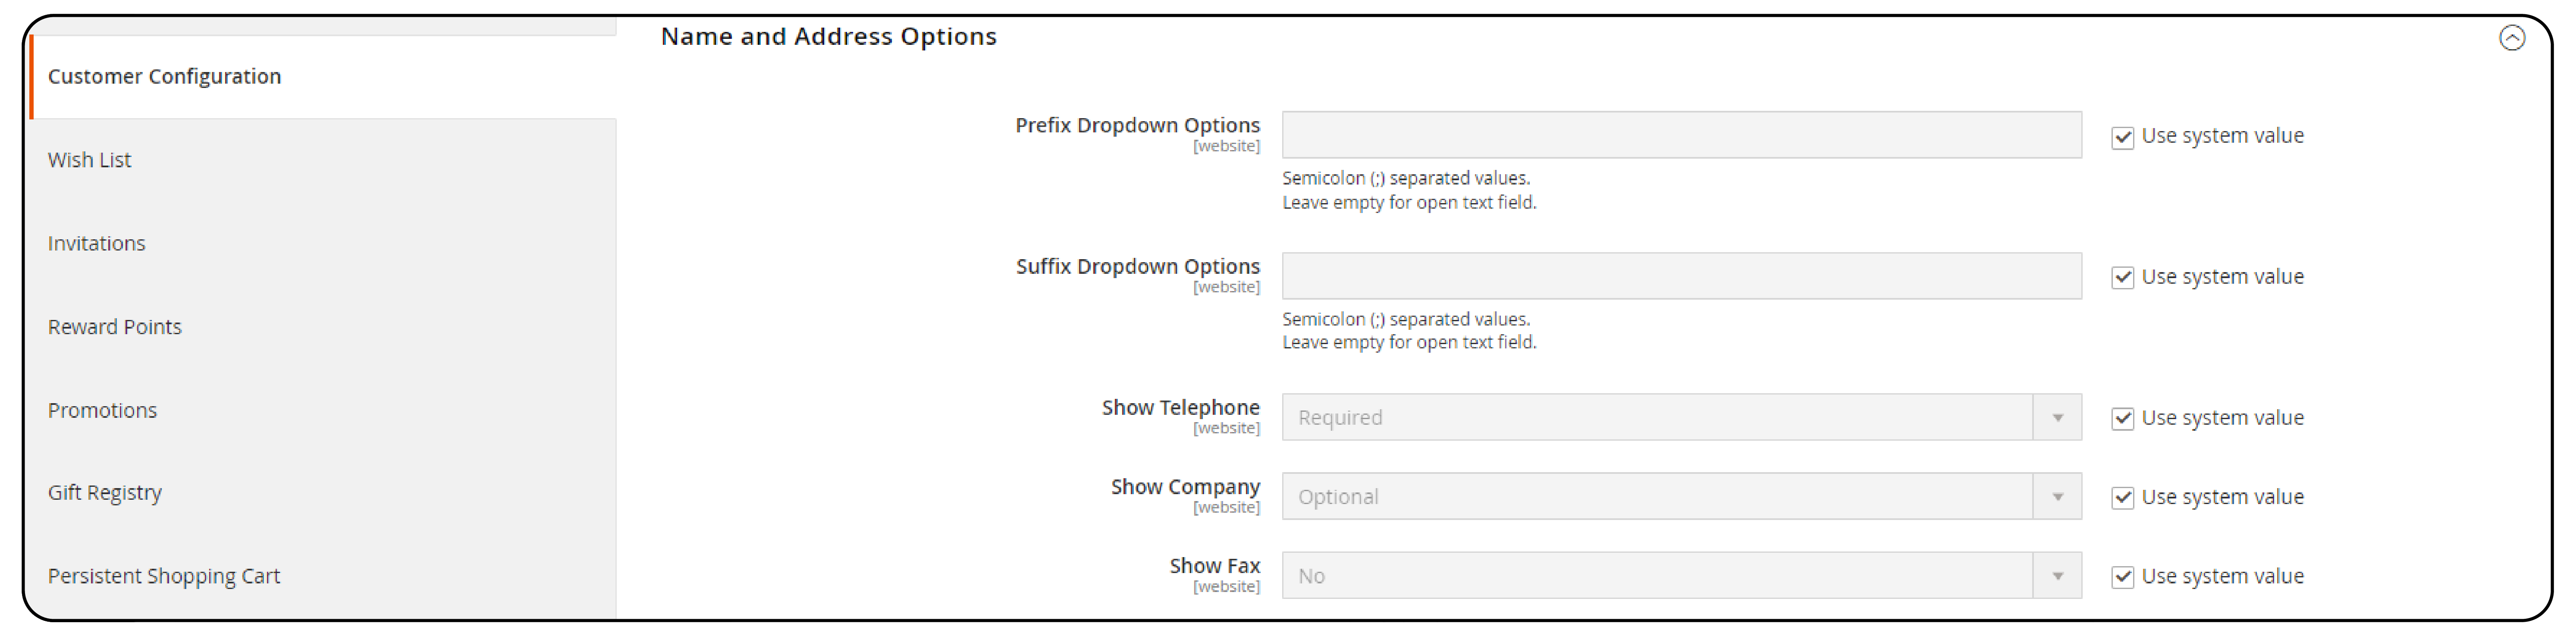 Adjusting Name and Address Options for Telephone Validation in Magento 2